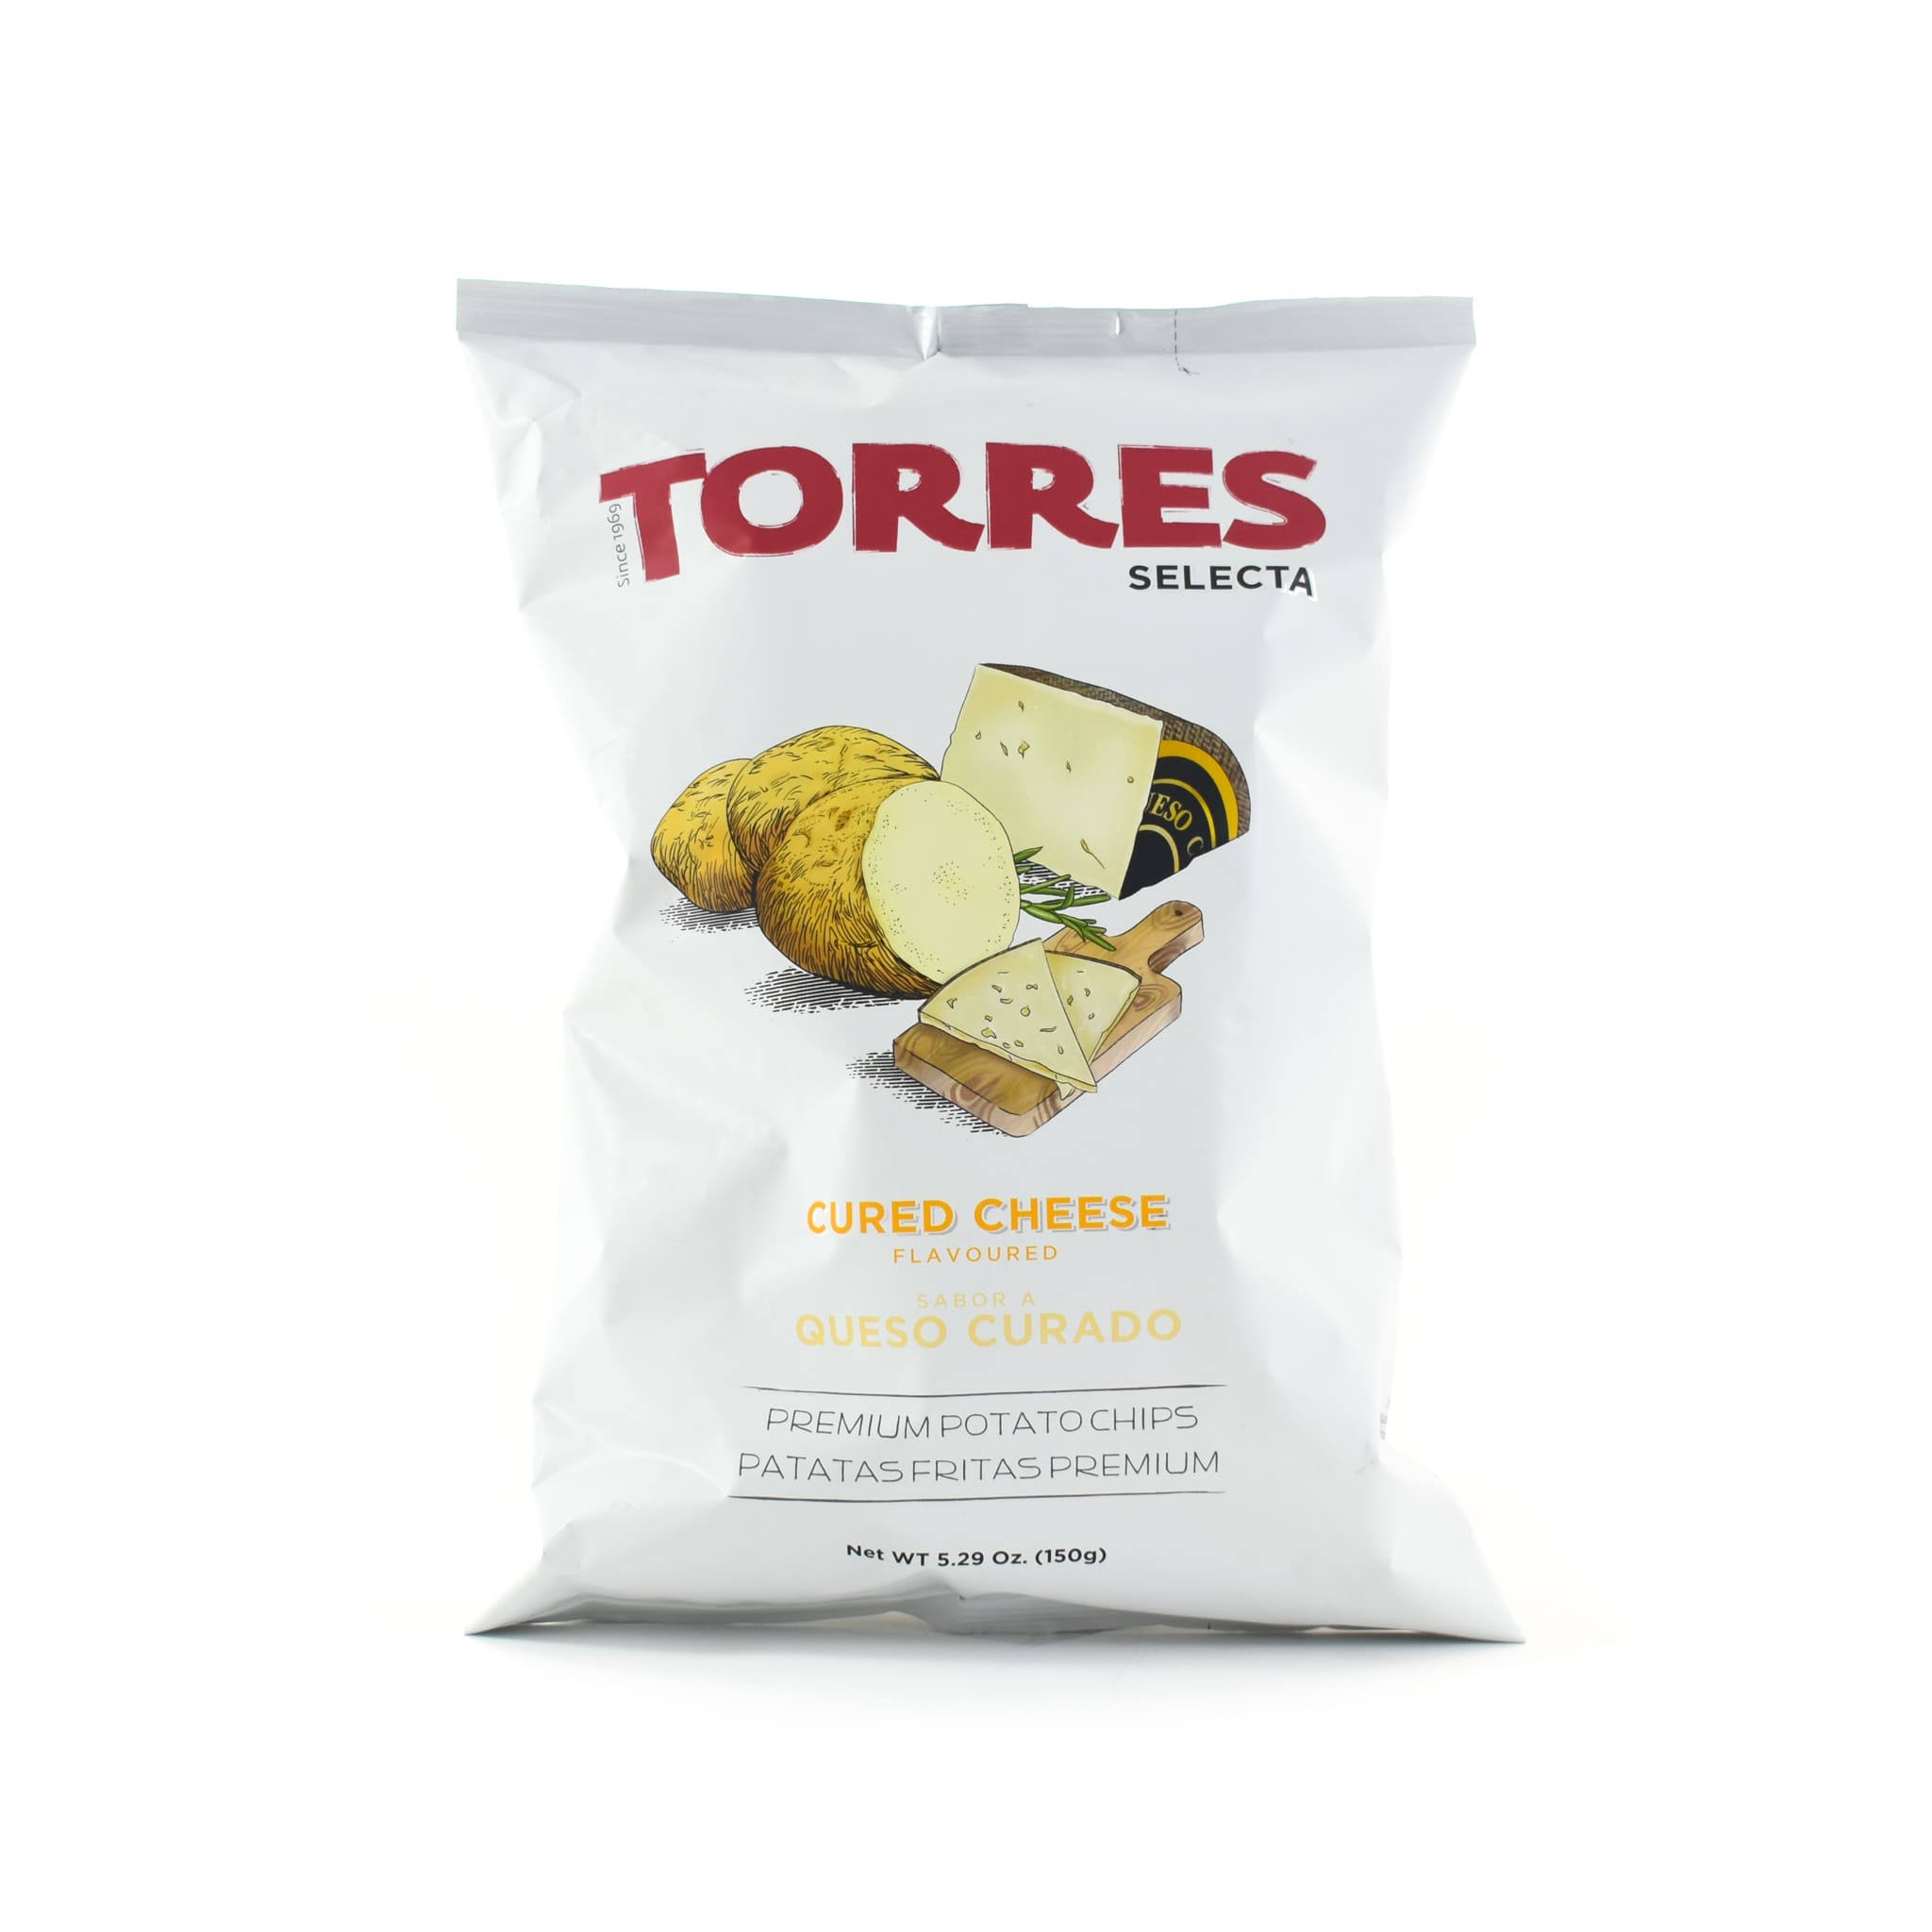 Torres - Cured Cheese Potato Crisps, 150g